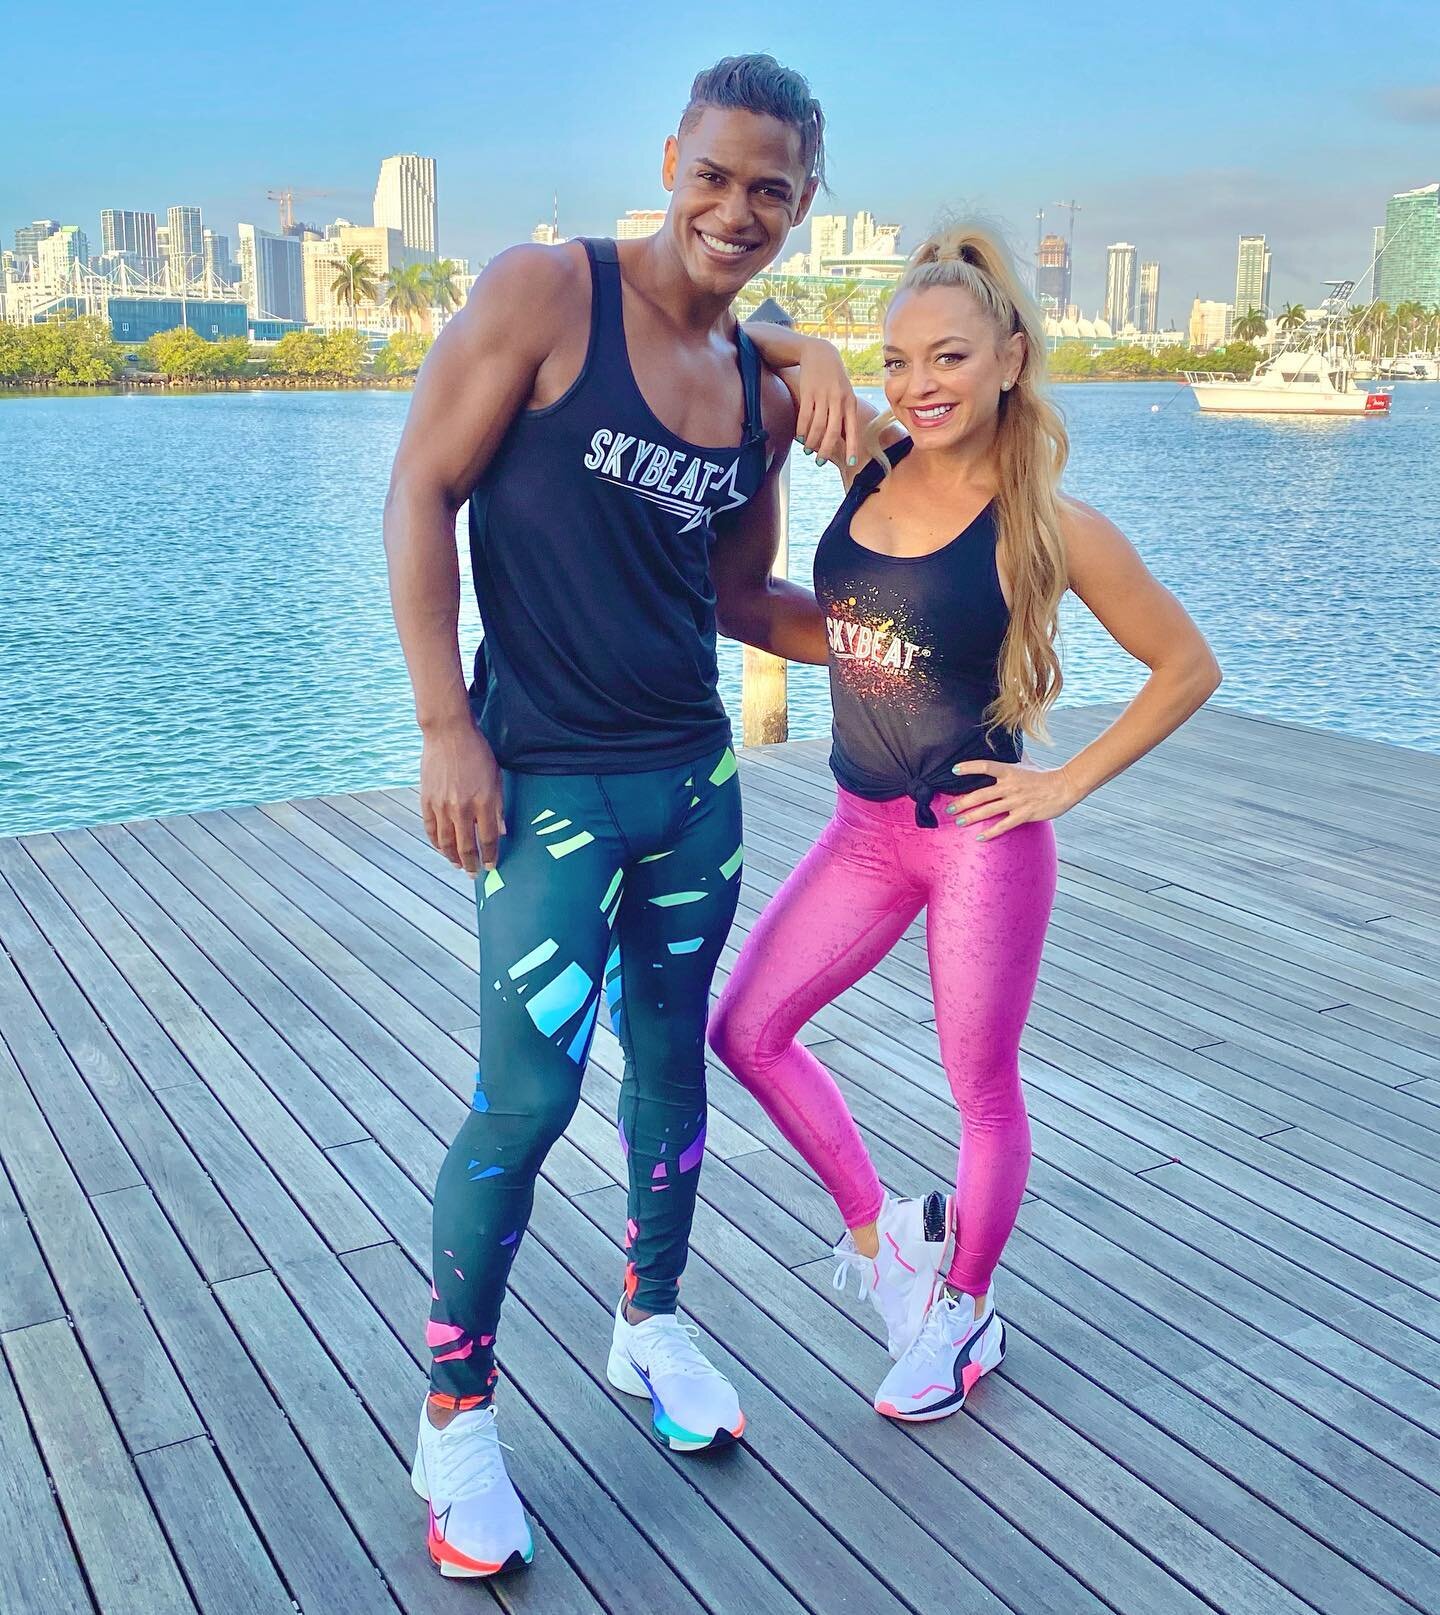 Check out the new super-fun Skybeat Dance Fitness class I did with amazing @christadipaolo founder of @boxingandbubbles . Class now posted on the website:

https://www.skybeatdance.com

After you take the class . Go check out her amazing website and 